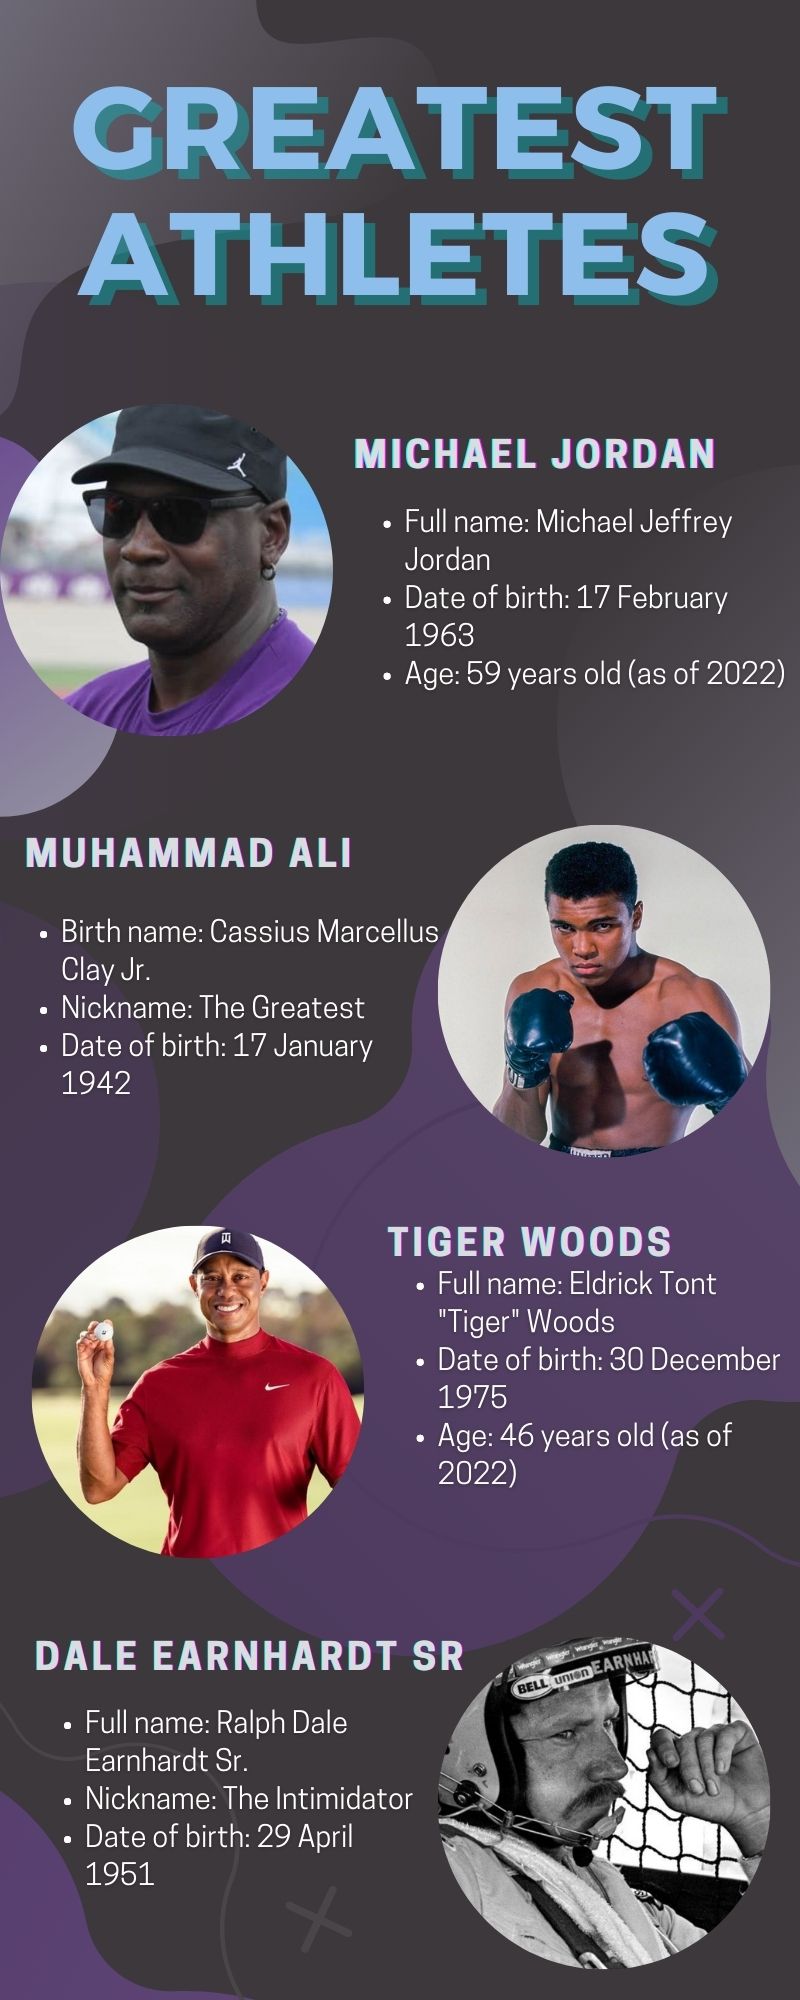 All-time greatest athletes